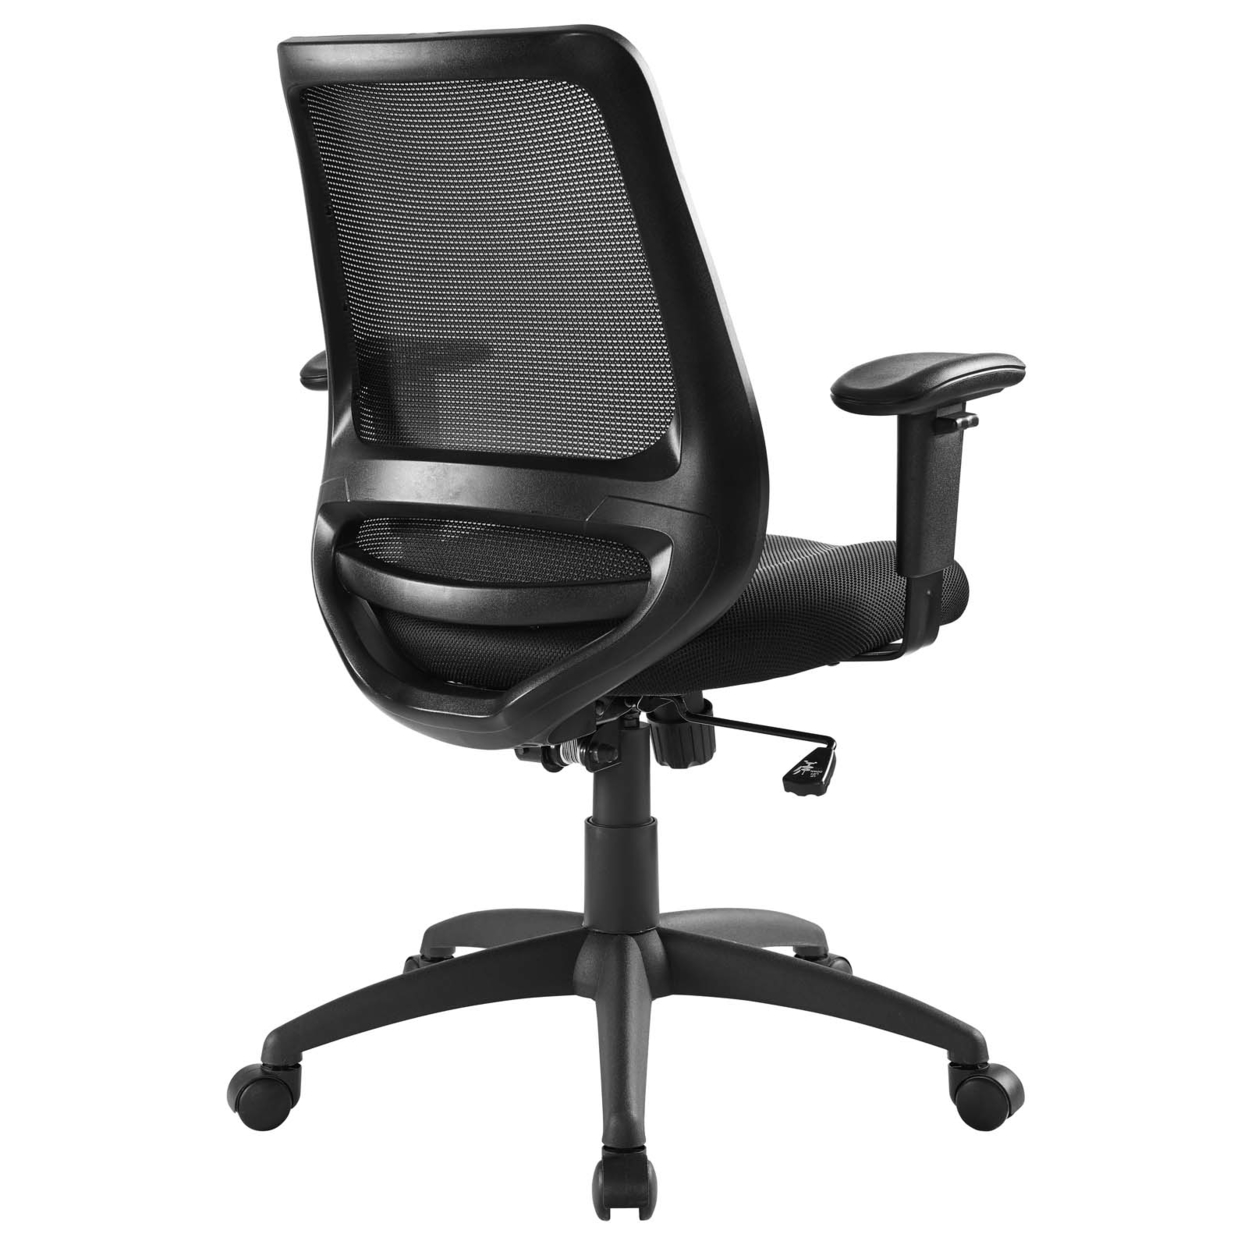 Forge Mesh Office Chair (3195-BLK)